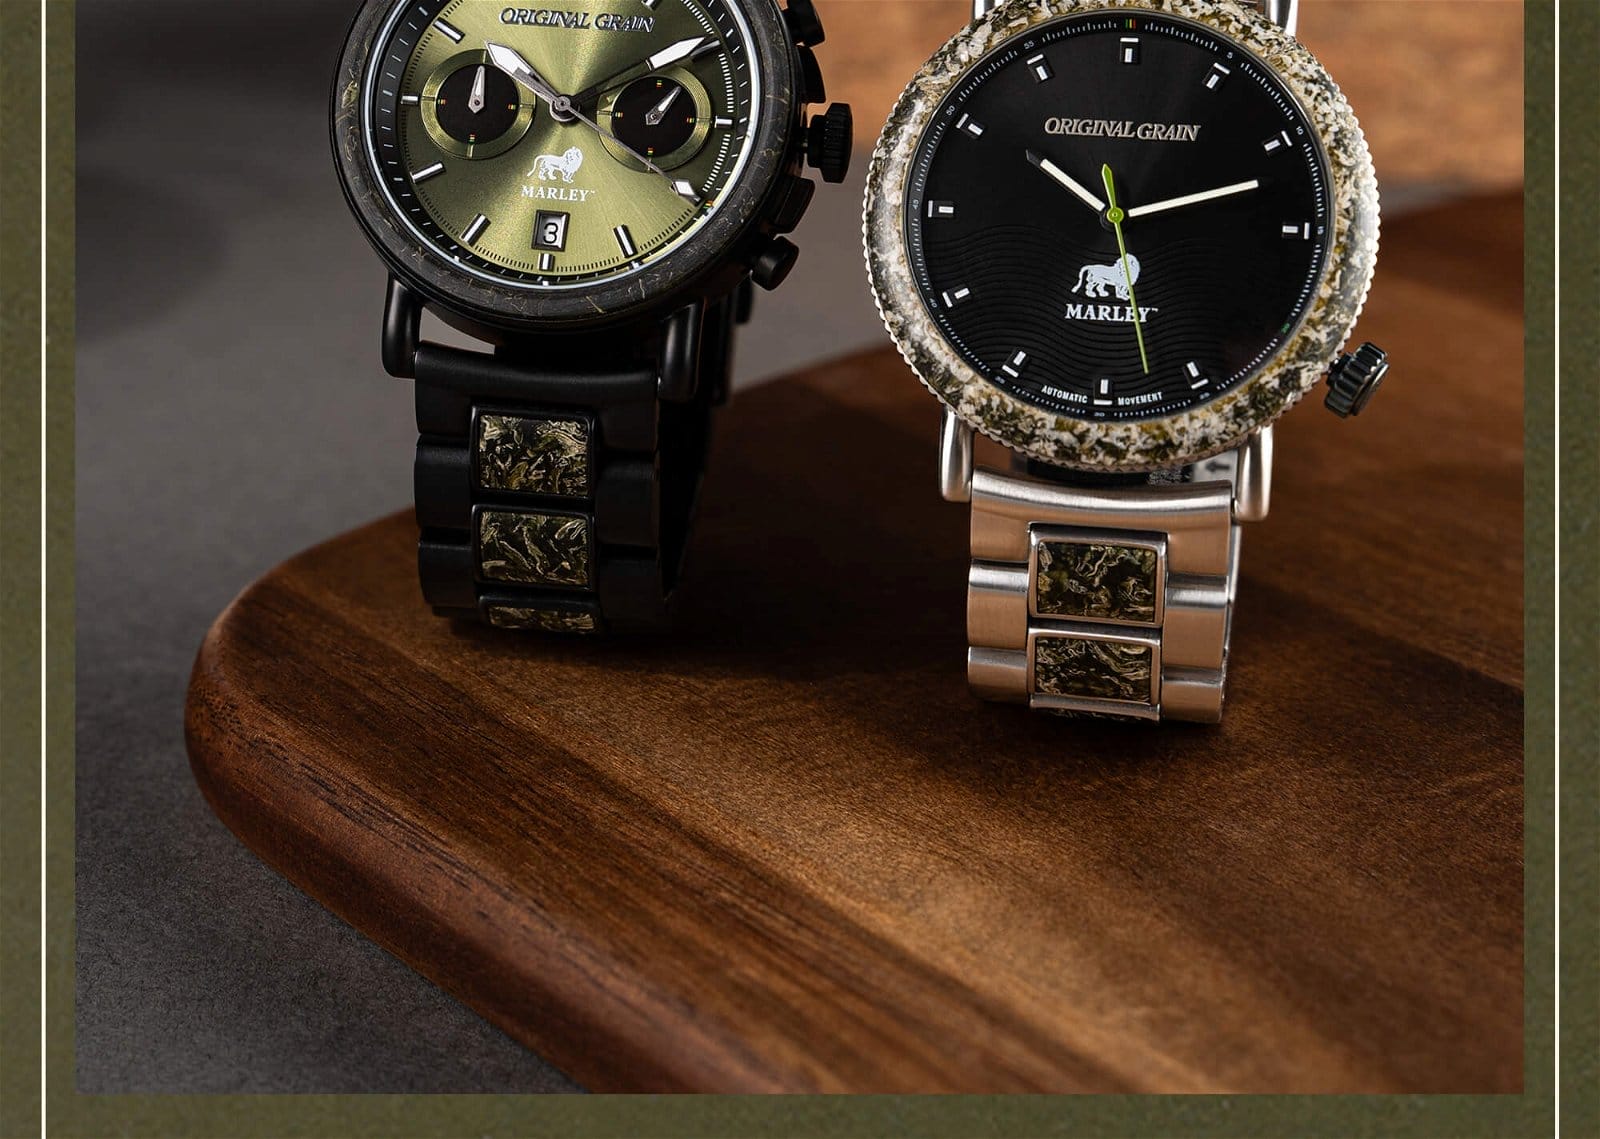 Click here to reserve your Original Grain x Bob Marley Limited Hemp Watch Coming Soon